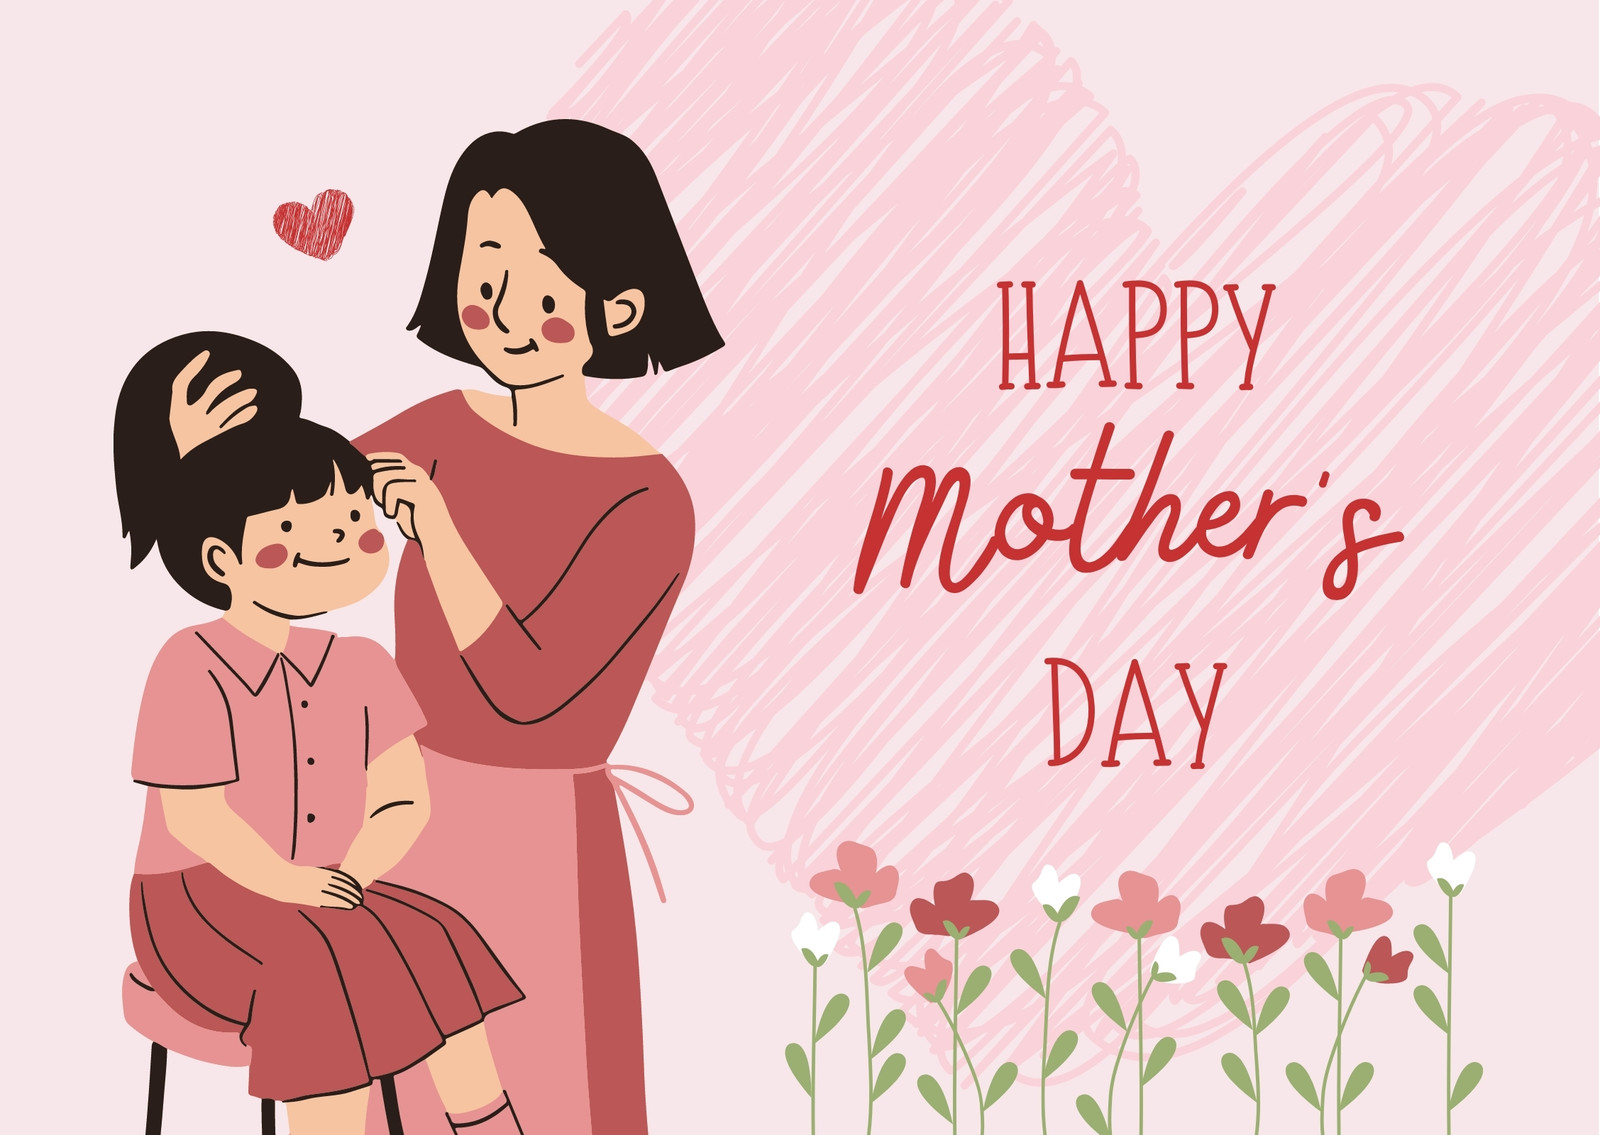 Savon Du Liban - Happy Mother's Day to all the wonderful moms out there!  Your love, sacrifice, and strength are the heartbeat of our community.  Today, we honor and celebrate you. Thank